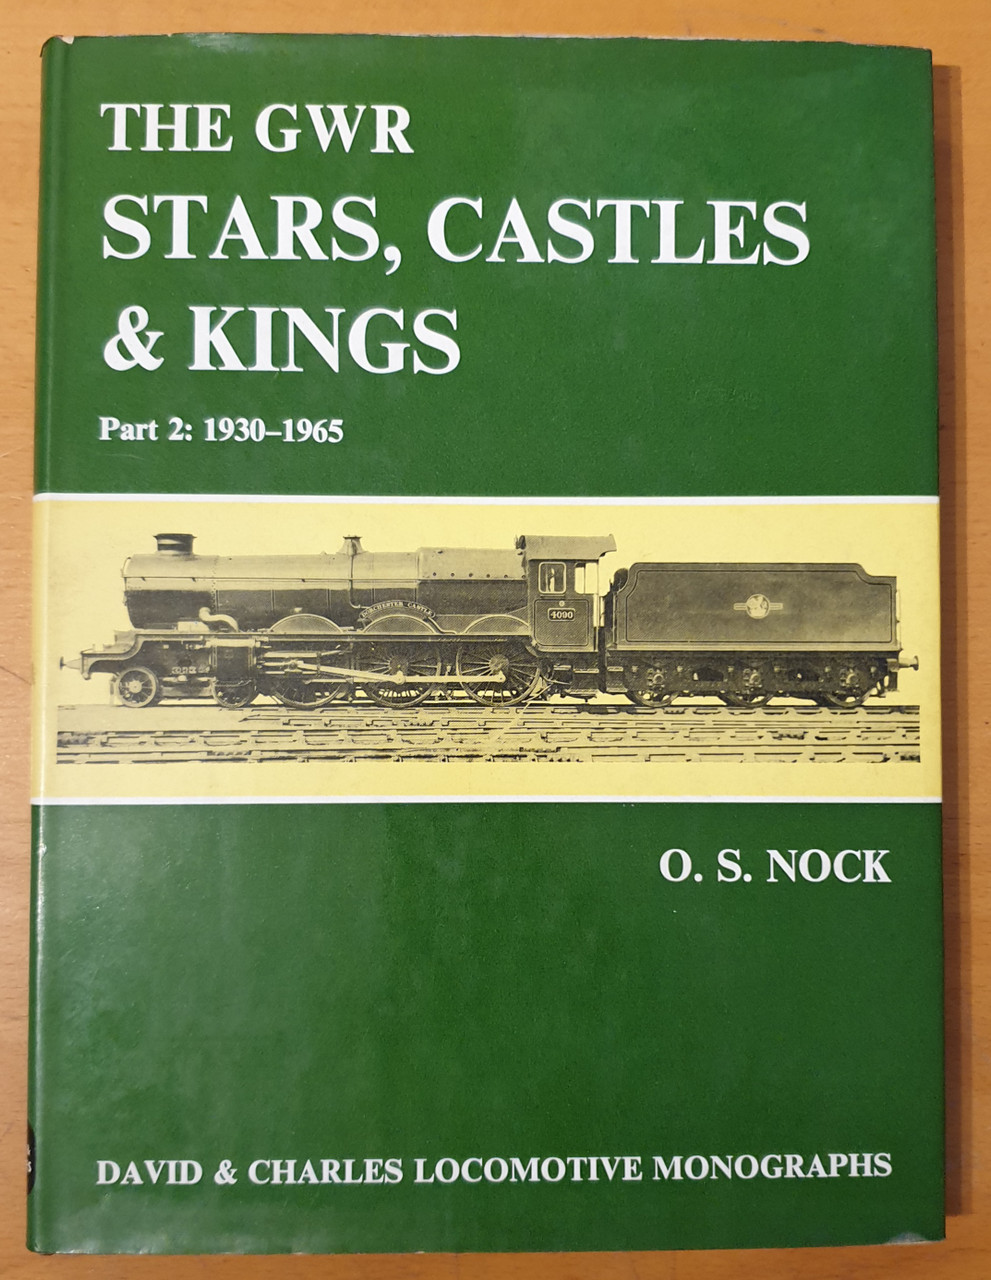 VT 3076 THE GWR STARS, CASTLES AND KINGS PART 2